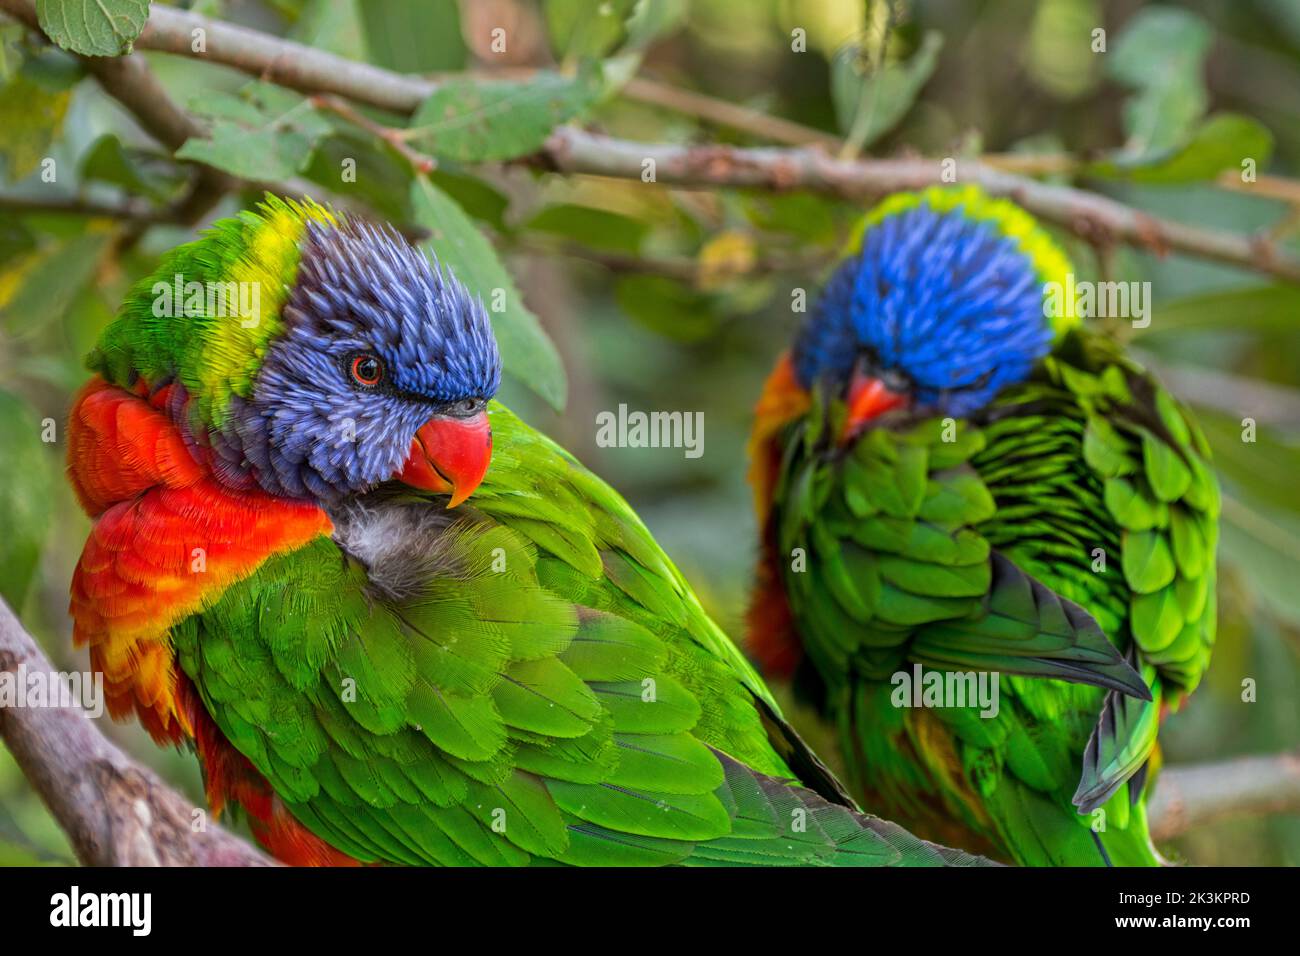 Two rainbow lorikeets (Trichoglossus moluccanus) resting in tree, species of parrot native to Australia Stock Photo